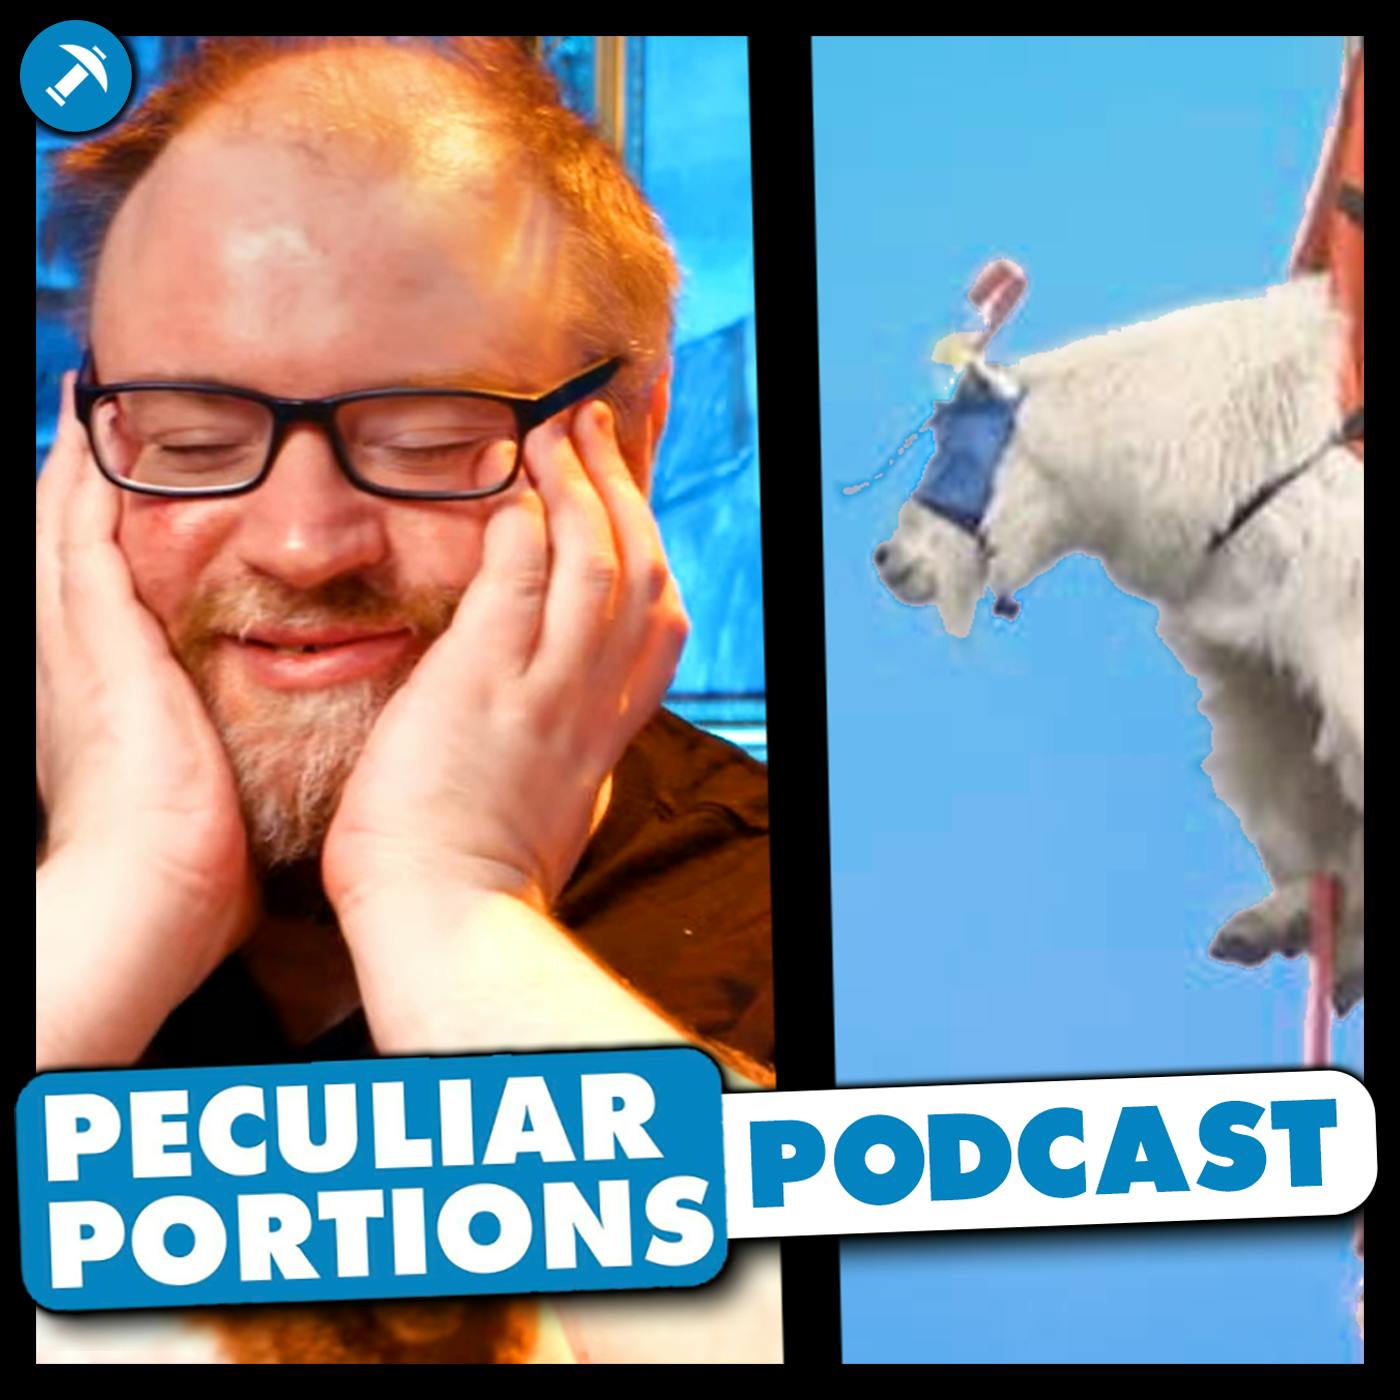 The goats that crave human pee - Simon's Peculiar Portions #75